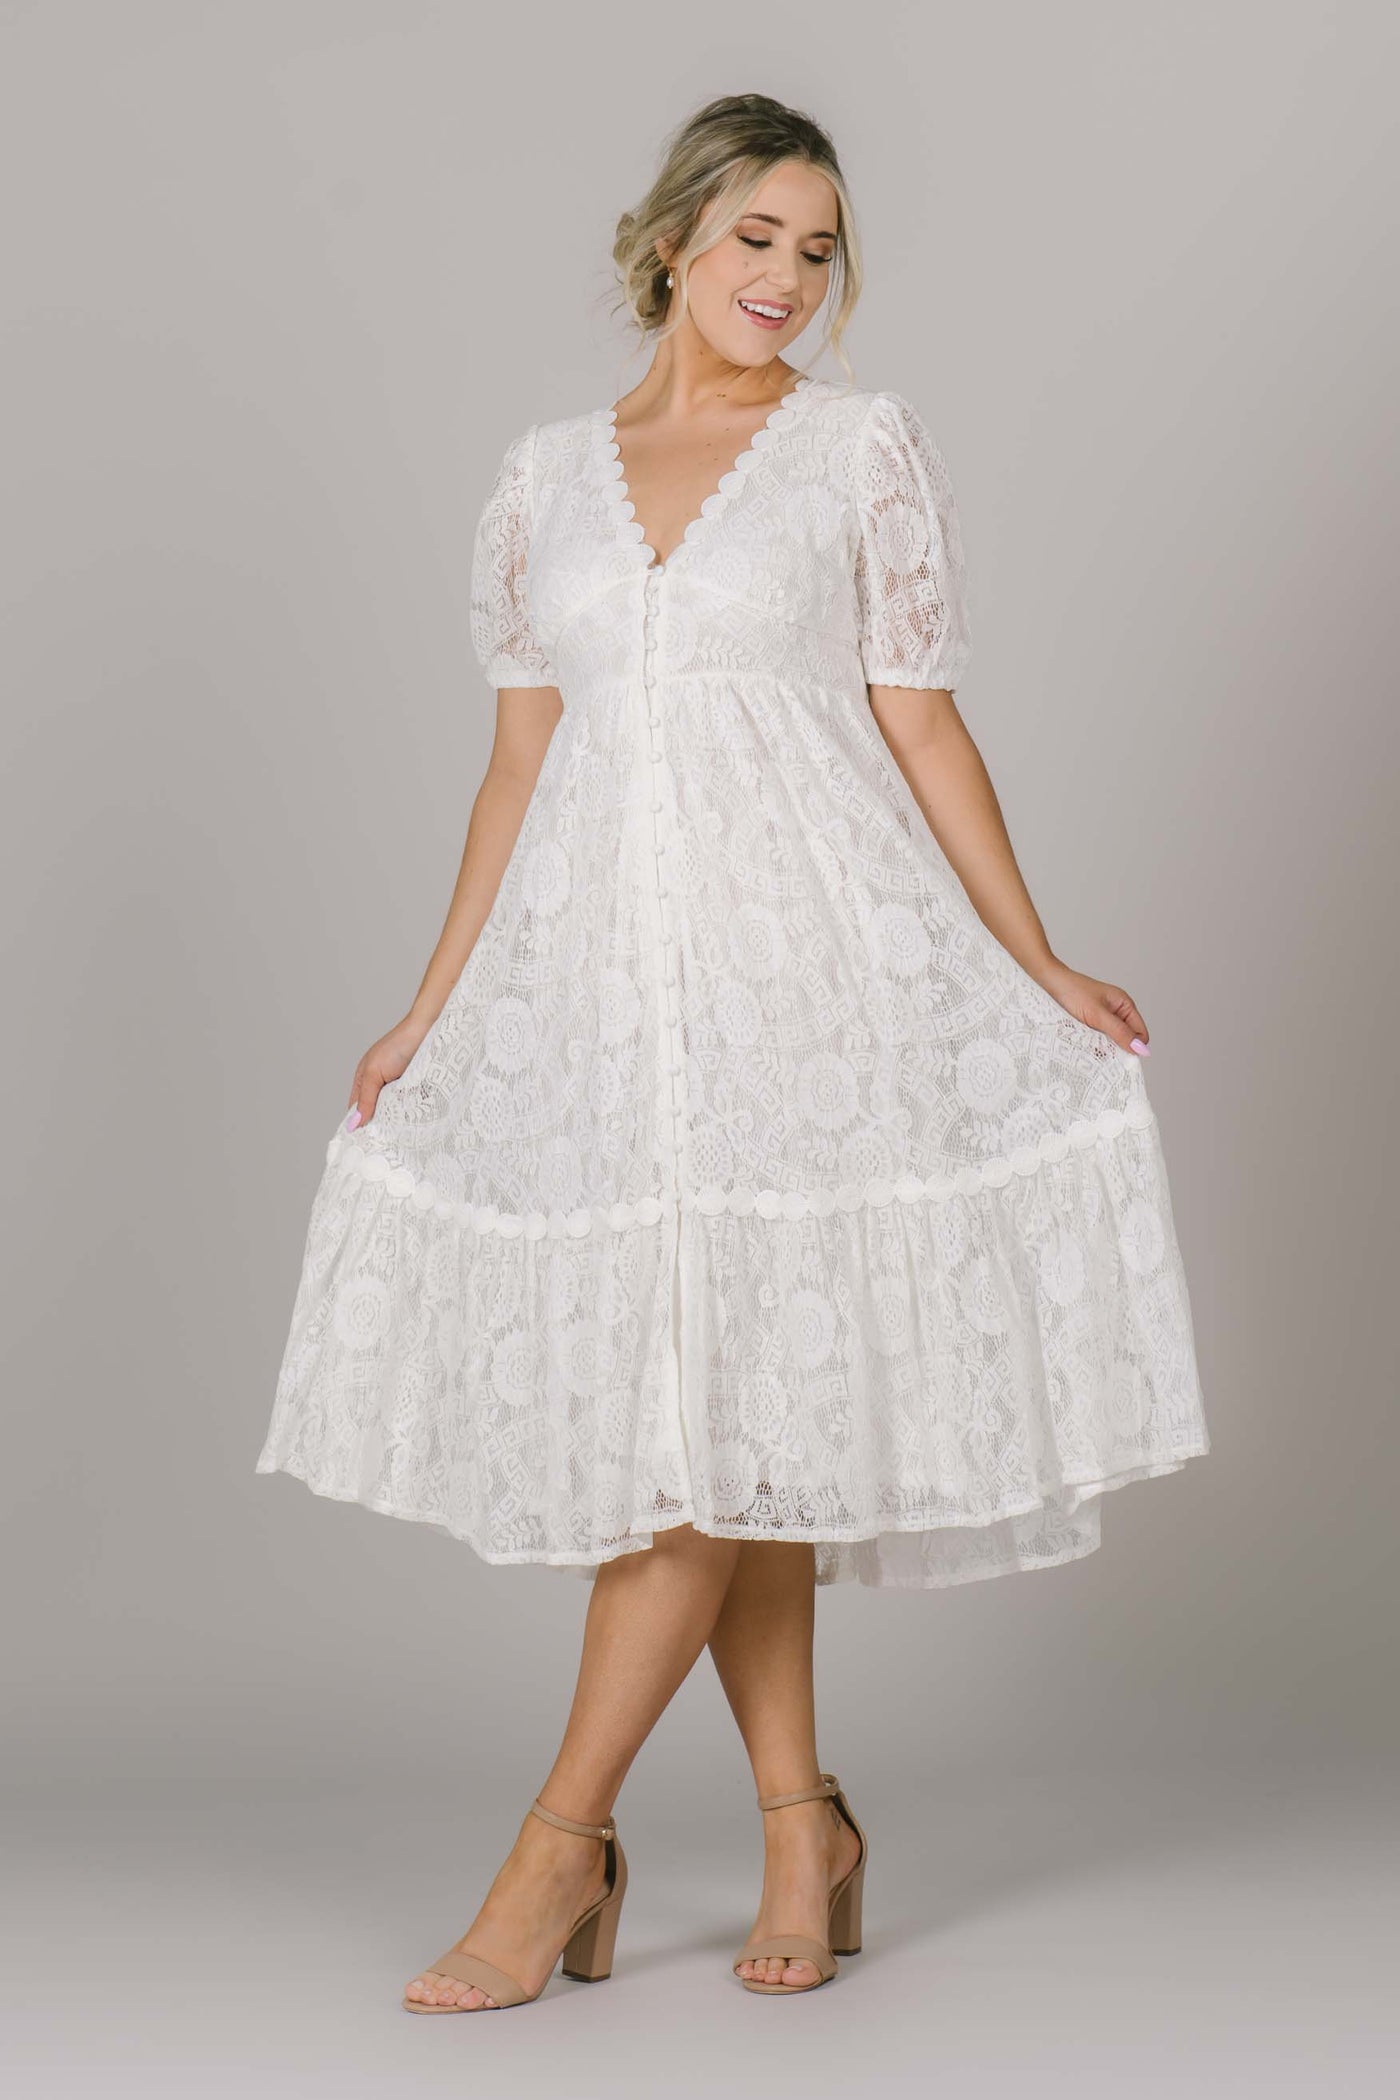 Modest dress perfect for a getaway dress with lace detail all over, buttons down the front and a v-neck. 